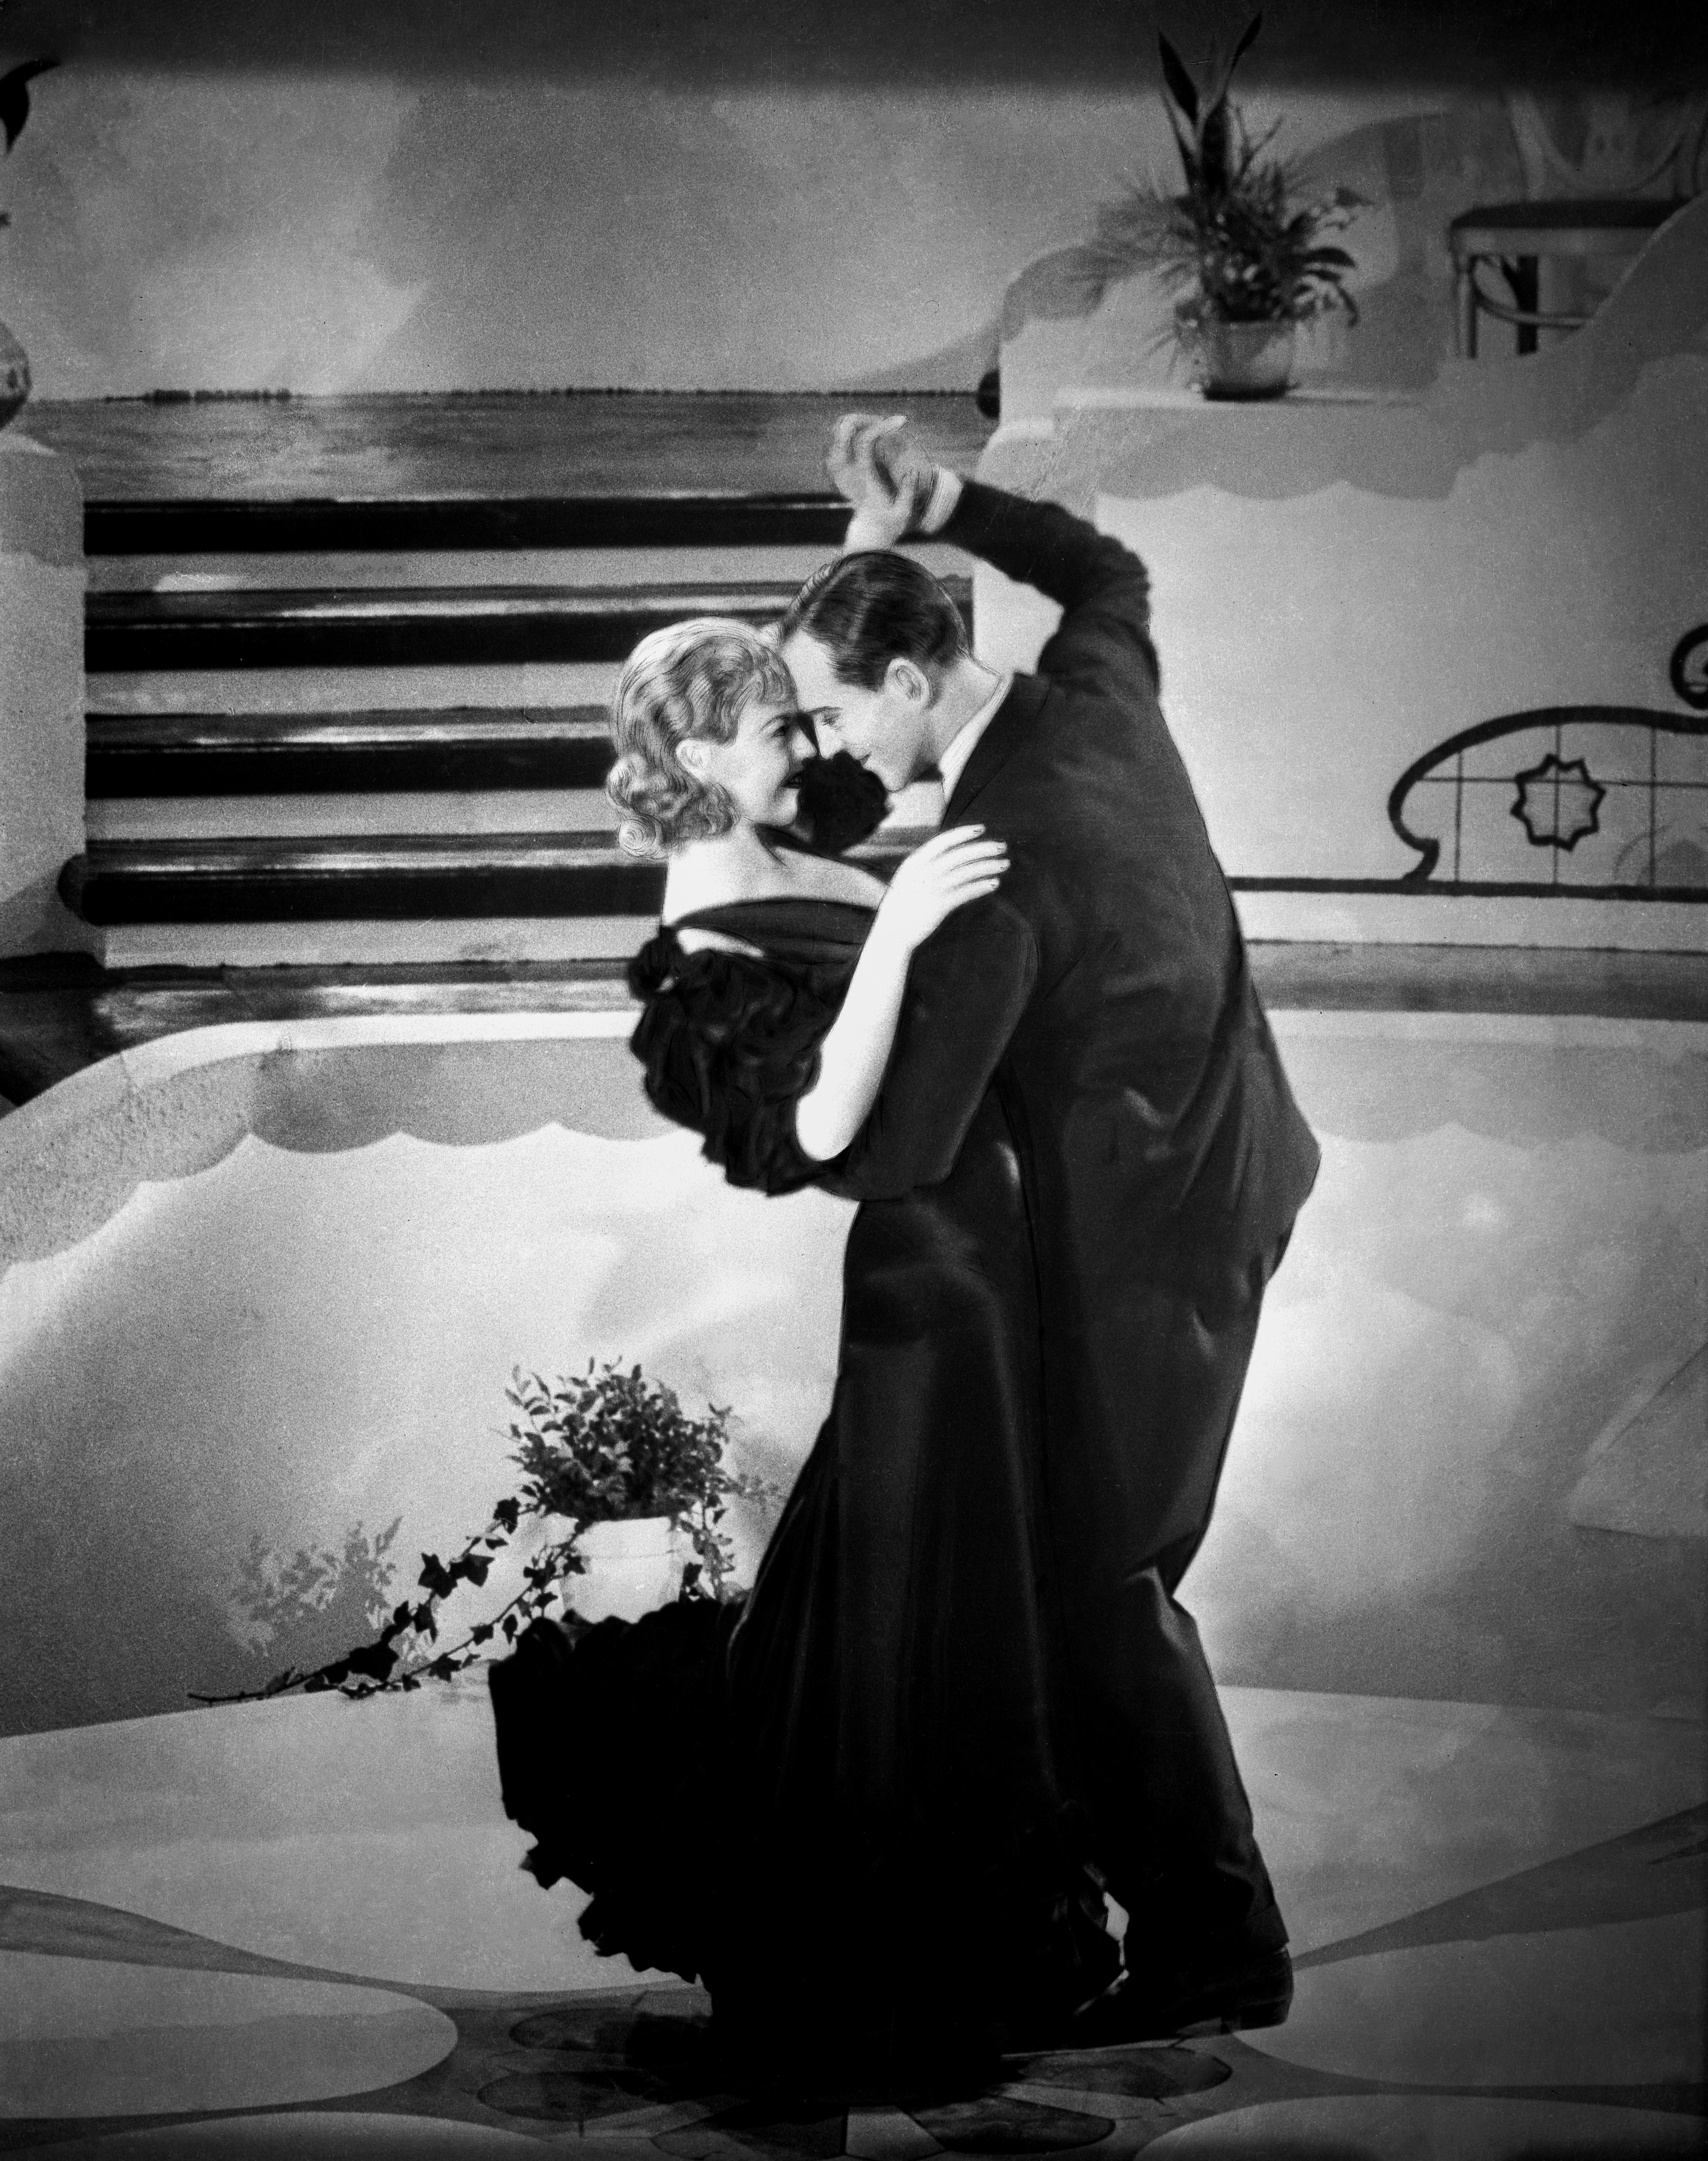 Unknown Portrait Photograph - Fred Astaire and Ginger Rogers Dancing Movie Star News Fine Art Print